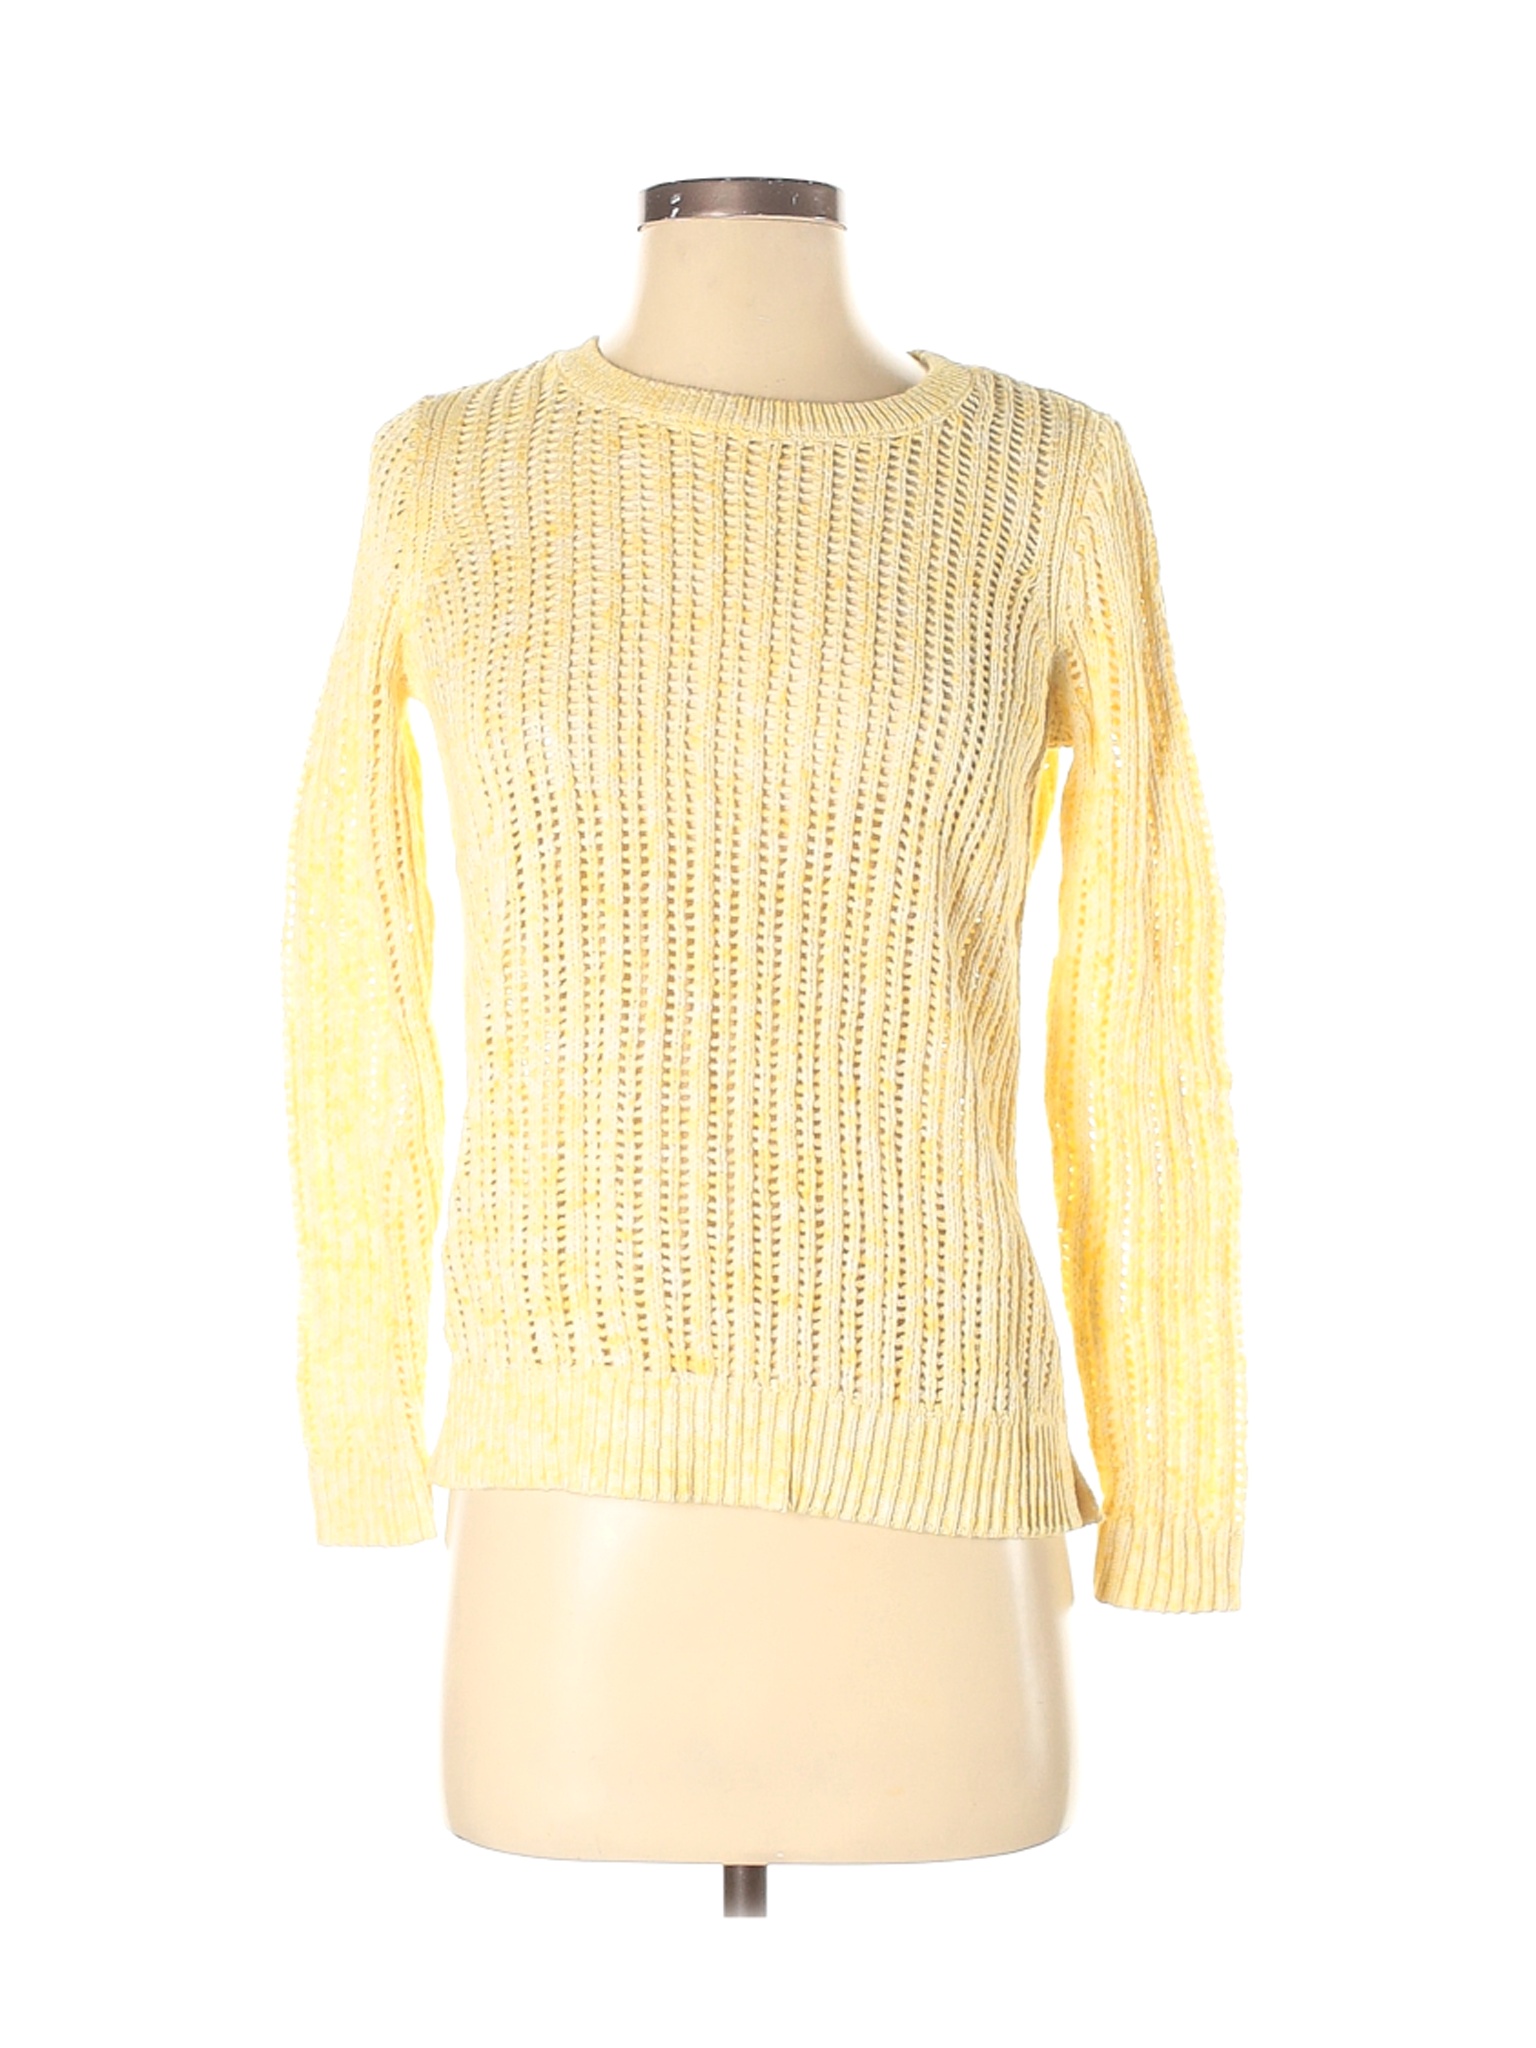 NWT Talbots Outlet Women Yellow Pullover Sweater P Petites | eBay